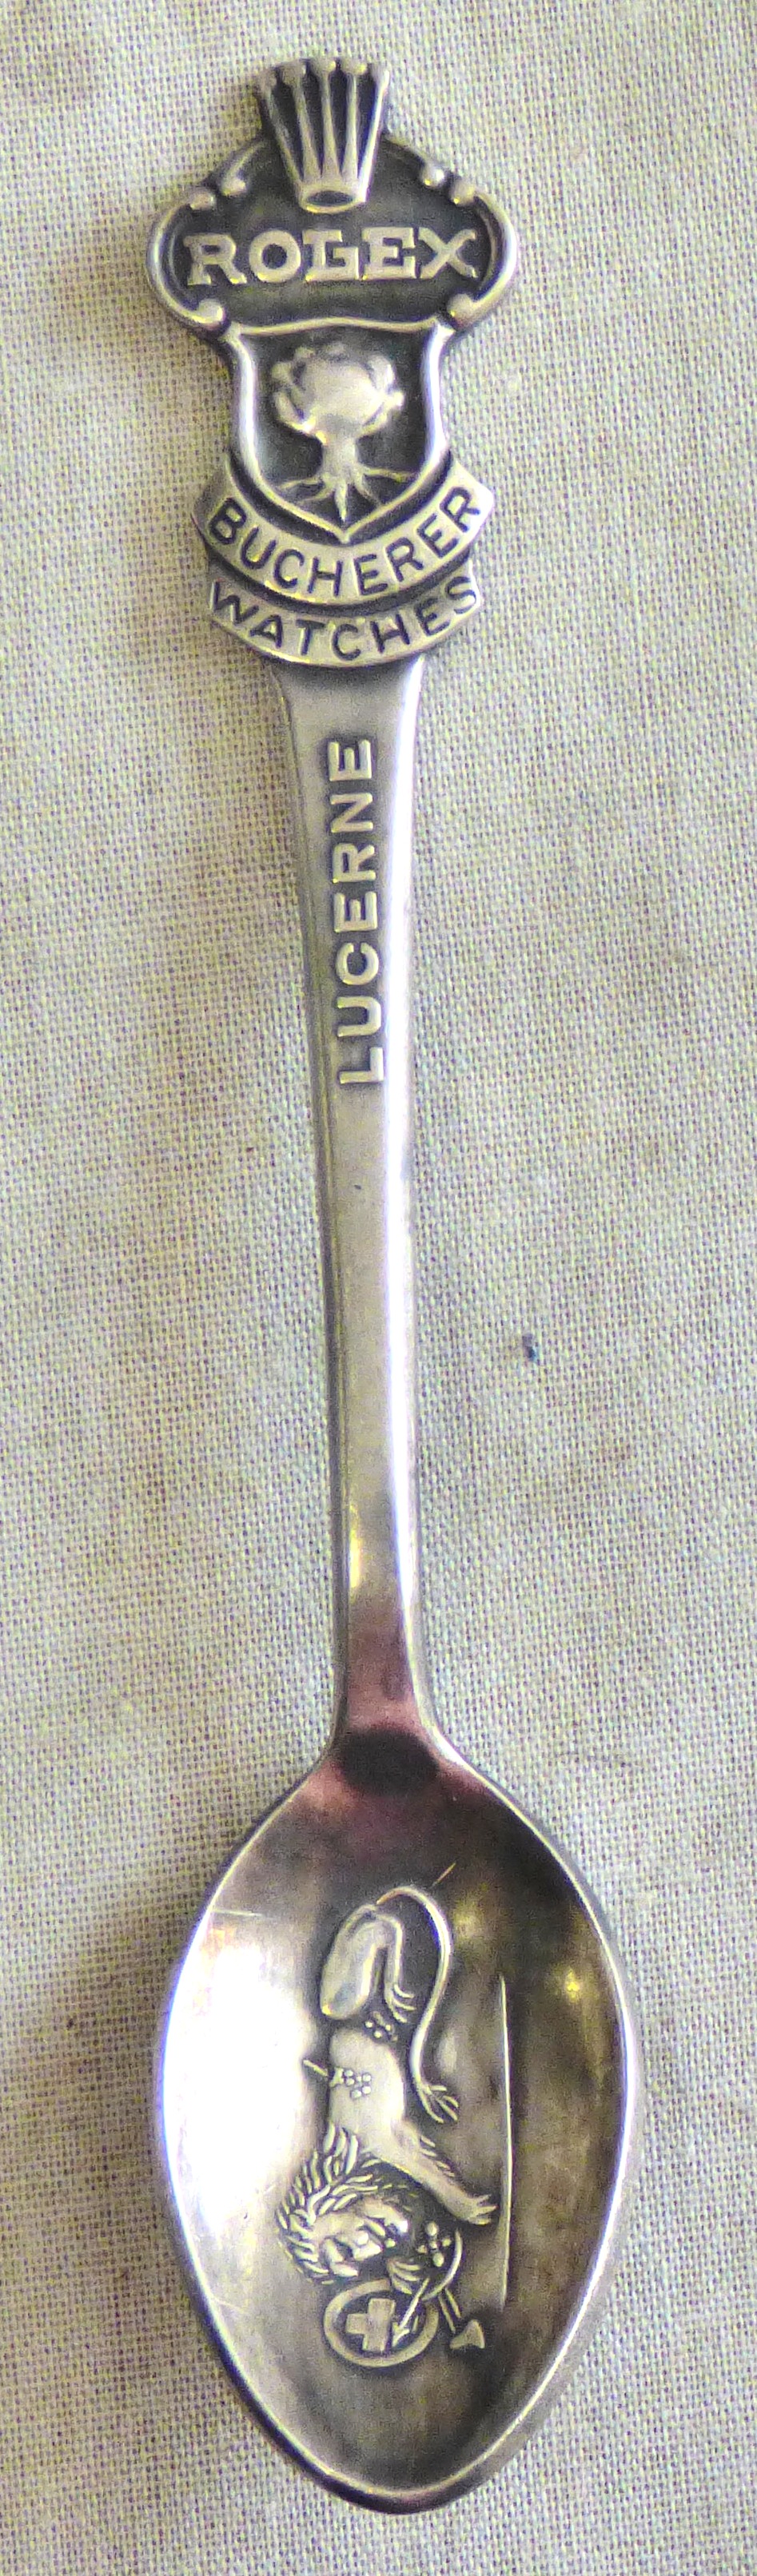 Spoon-A Rolex-Butchered Watches - with a lion on the spoon-Lucerne very decorative